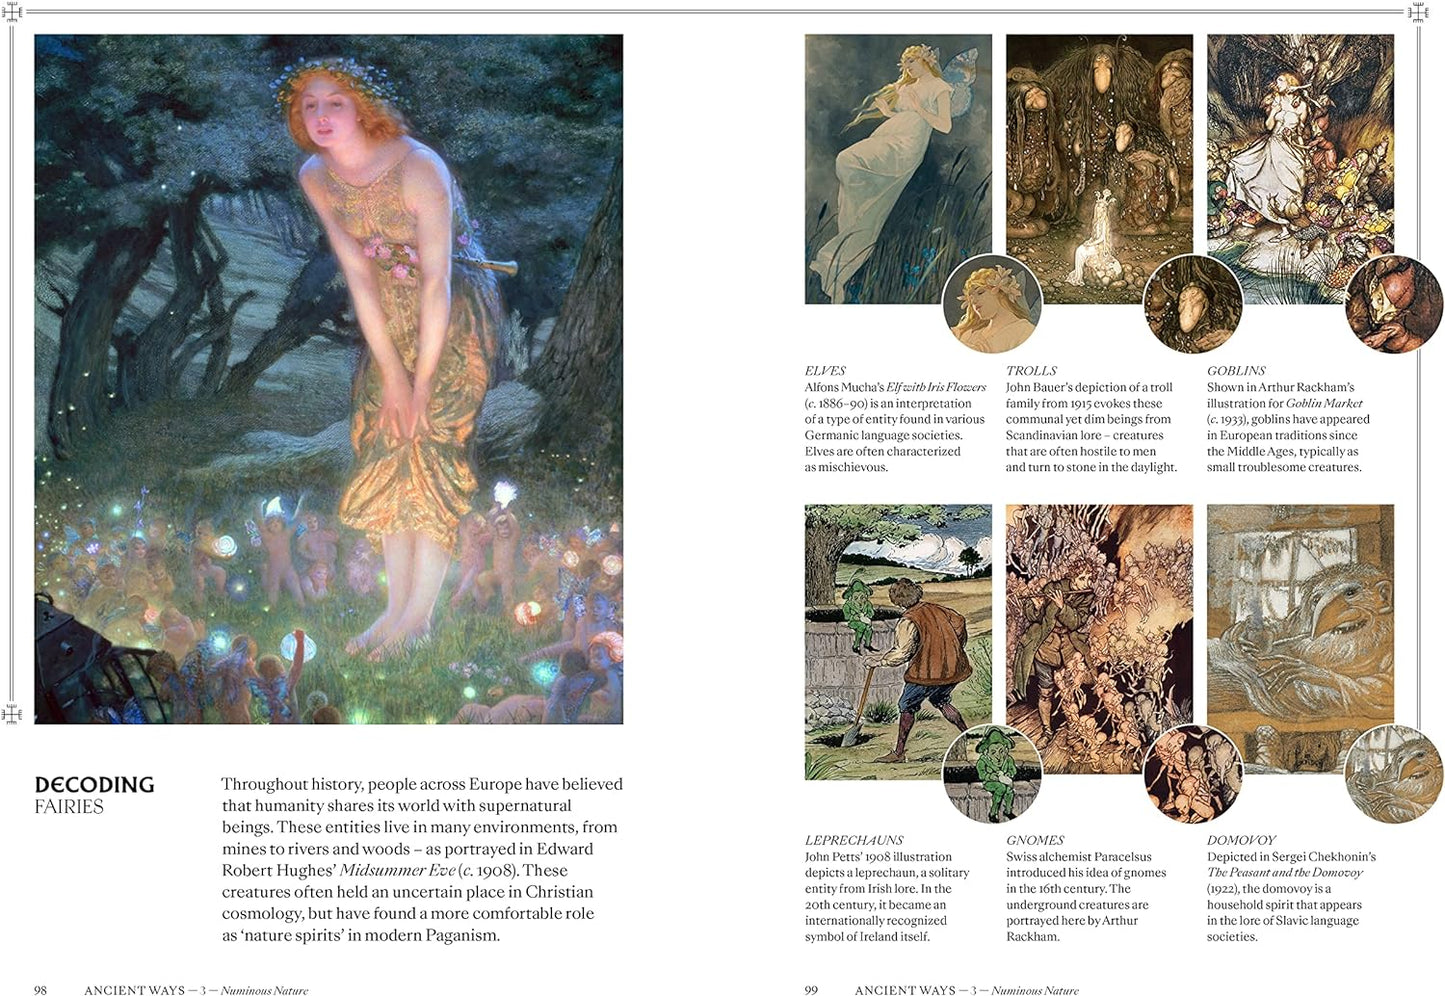 Pagans: The Visual Culture of Pagan Myths, Legends and Rituals by Ethan Doyle White (Hardback)